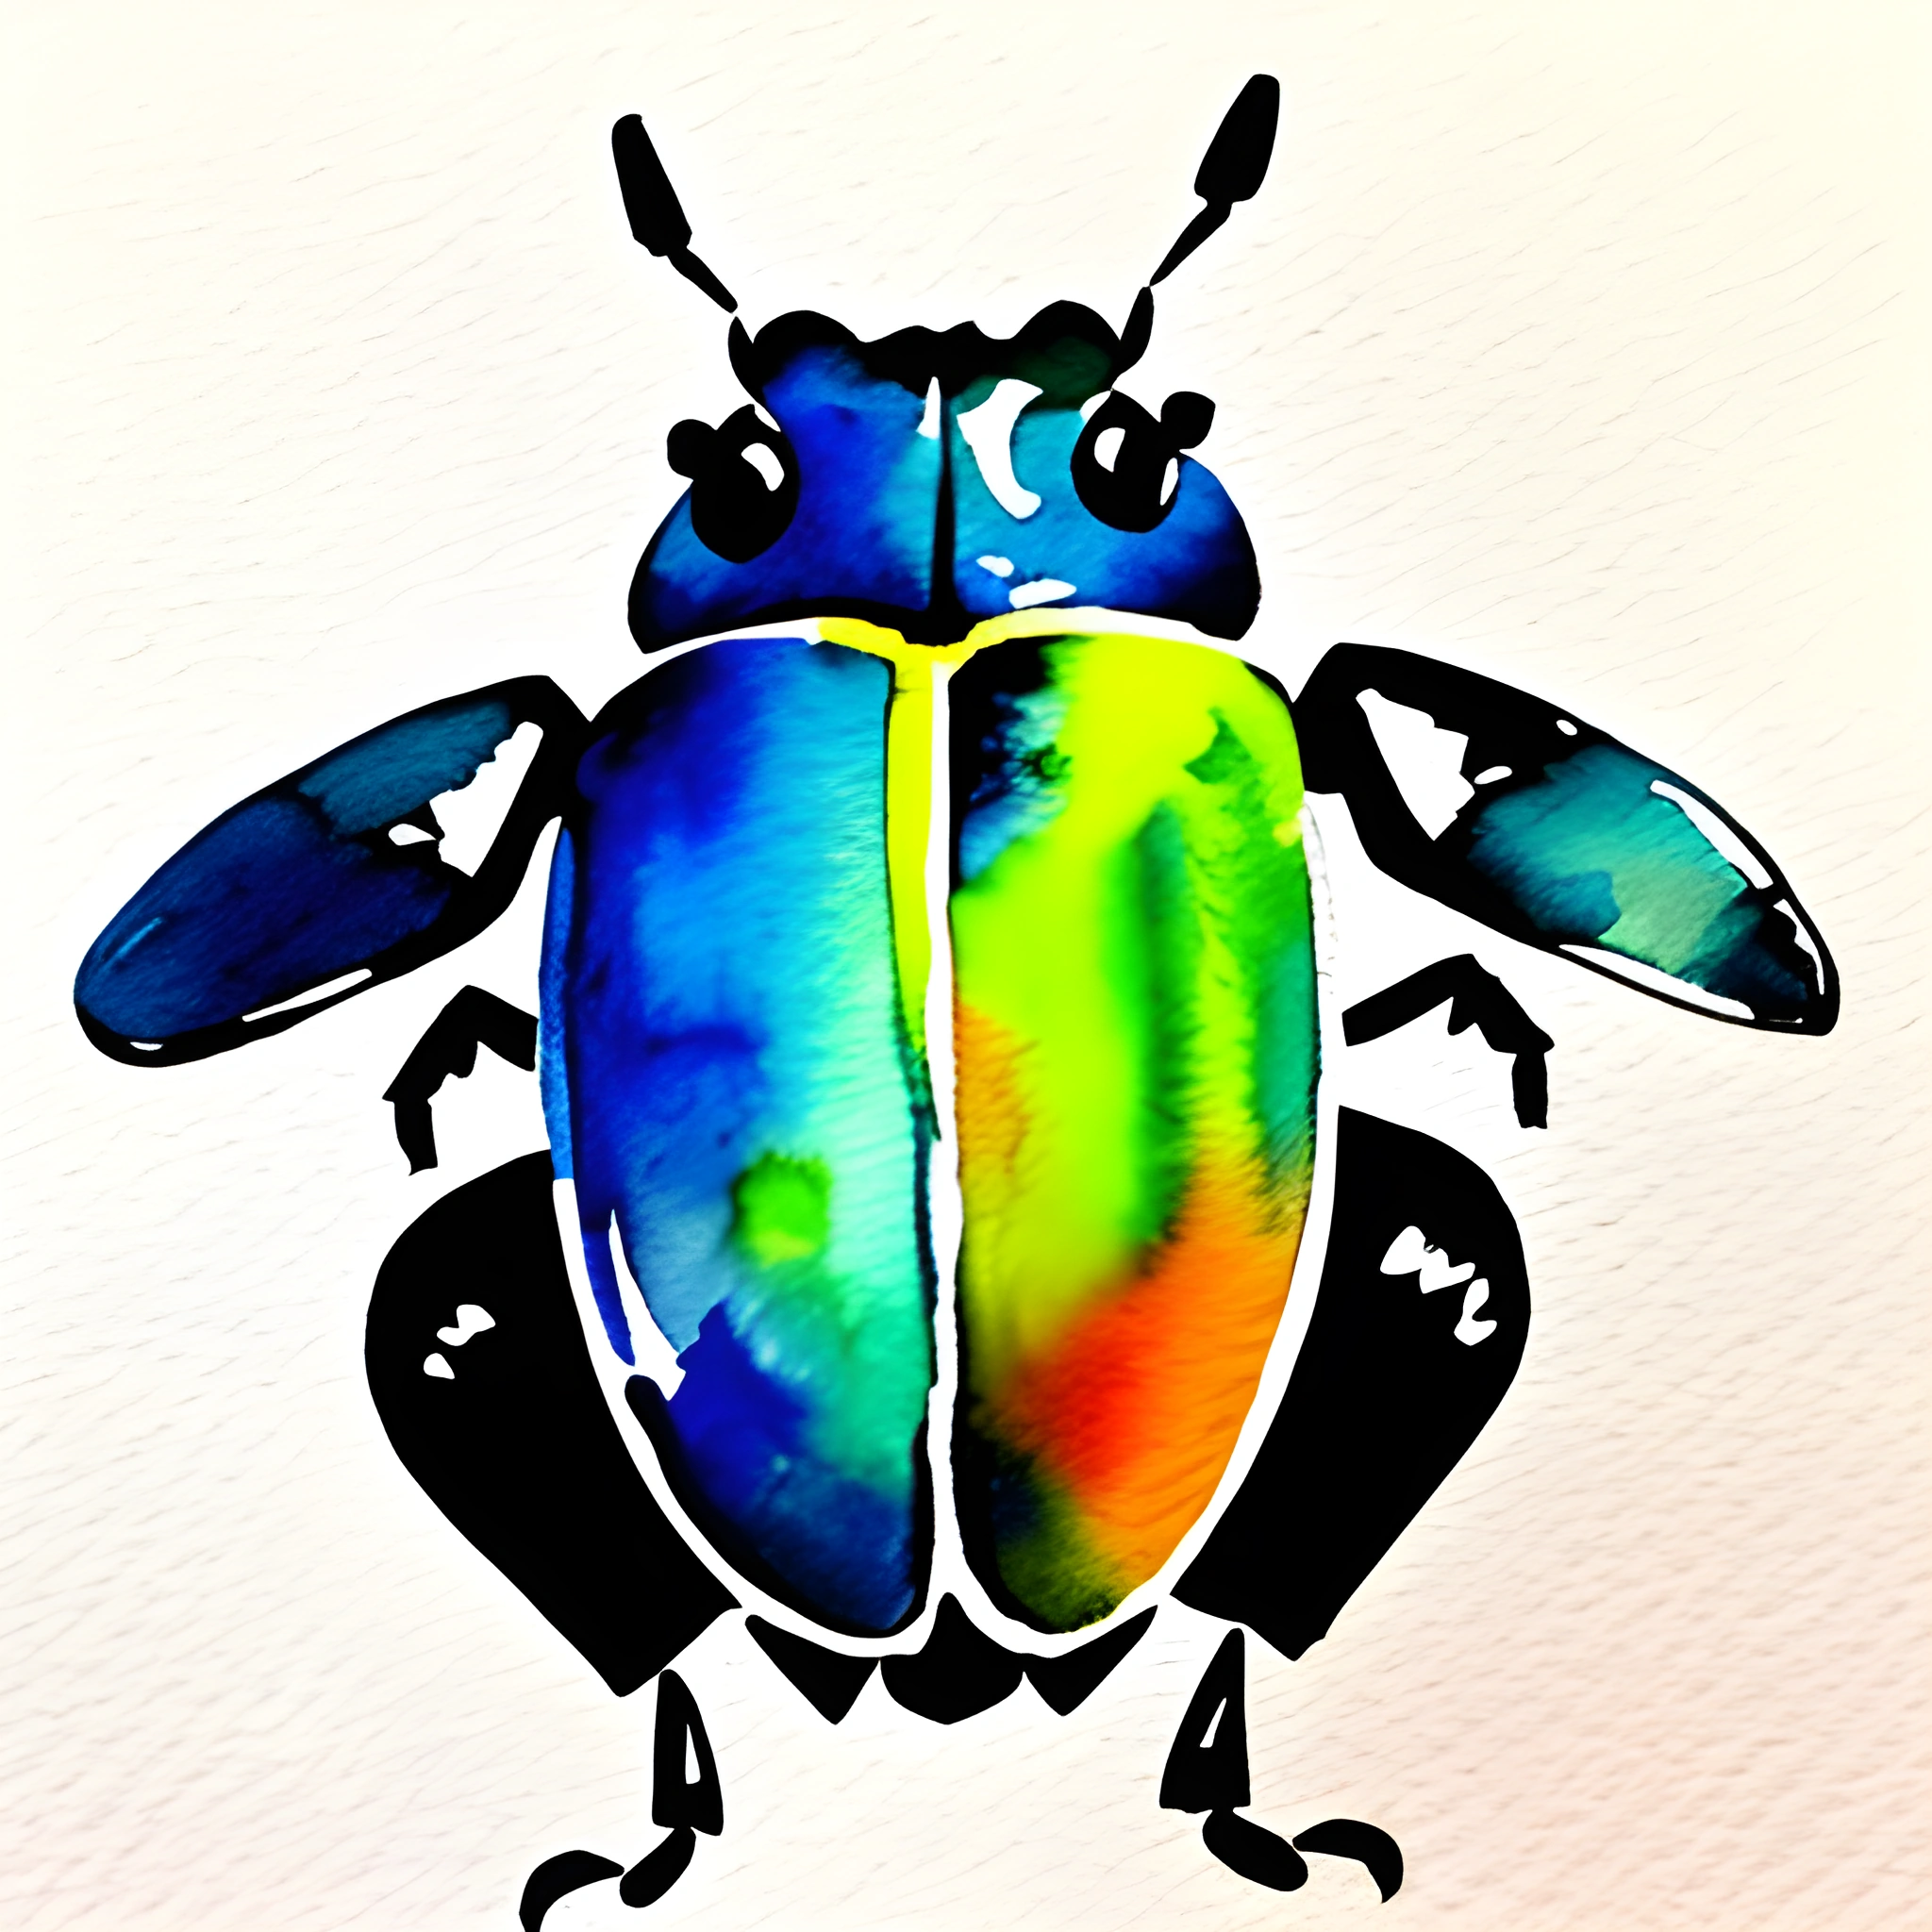 painting of a colorful bug with two eyes and a long tail